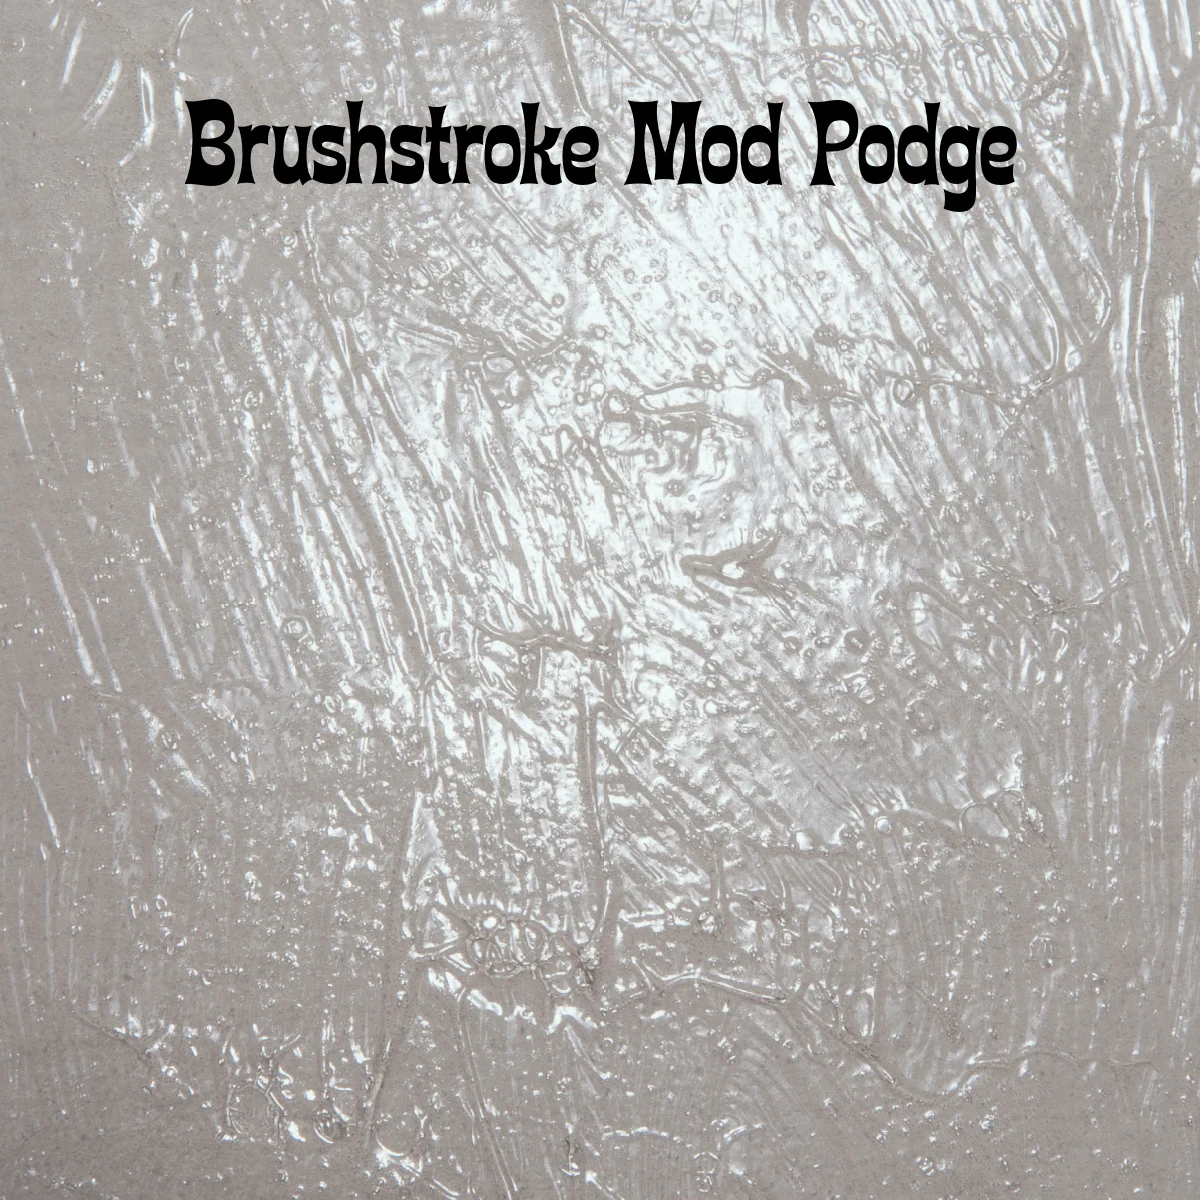 The Difference Between Matte and Gloss Mod Podge In Collage Art · Artsy  Fartsy Life